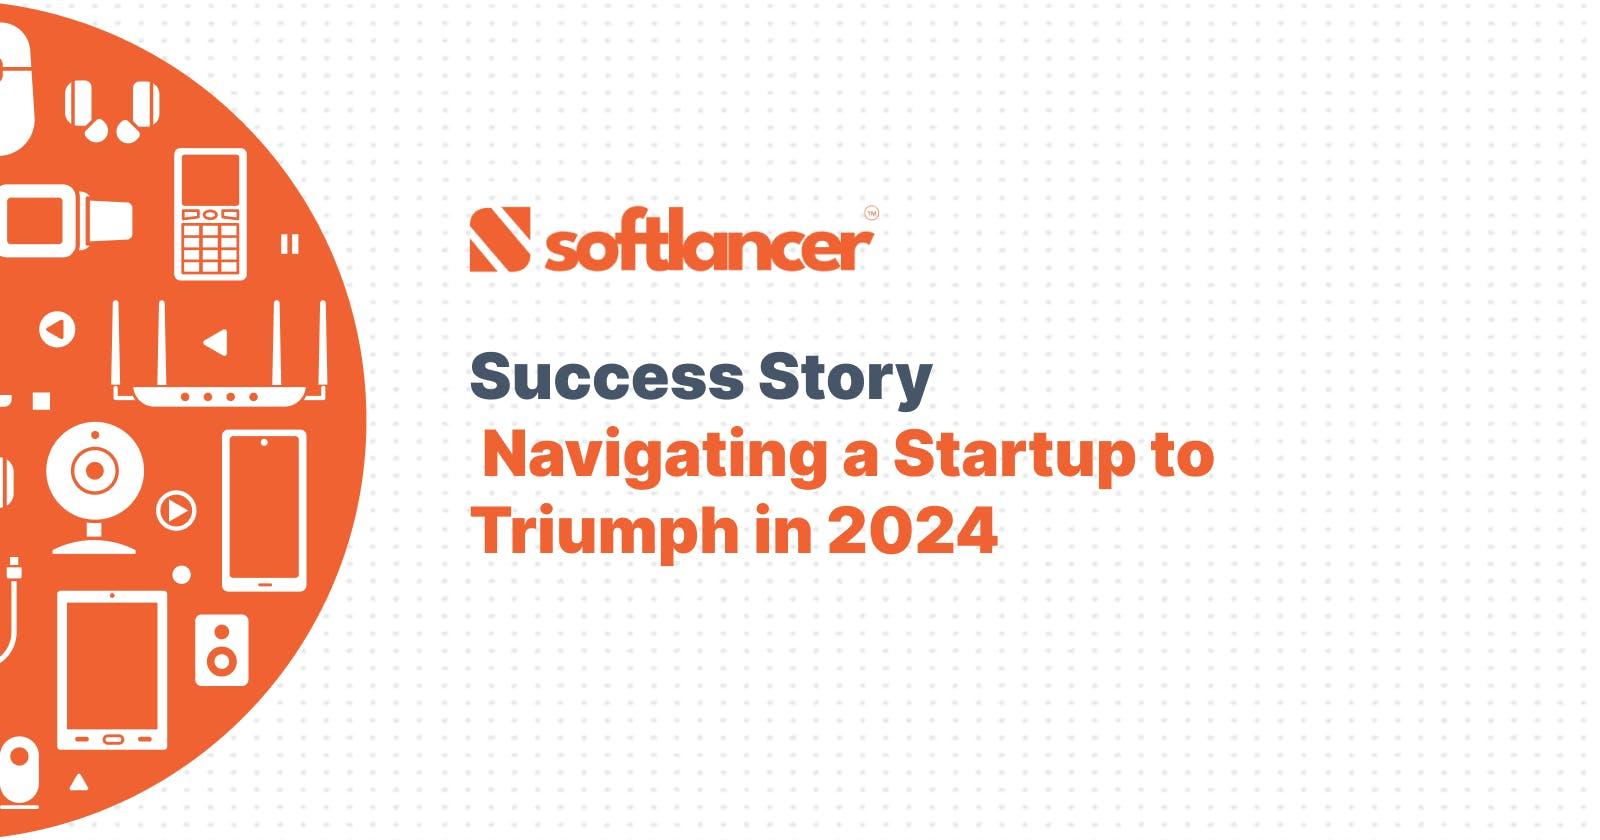 Success Story: Navigating a Startup to Triumph in 2024